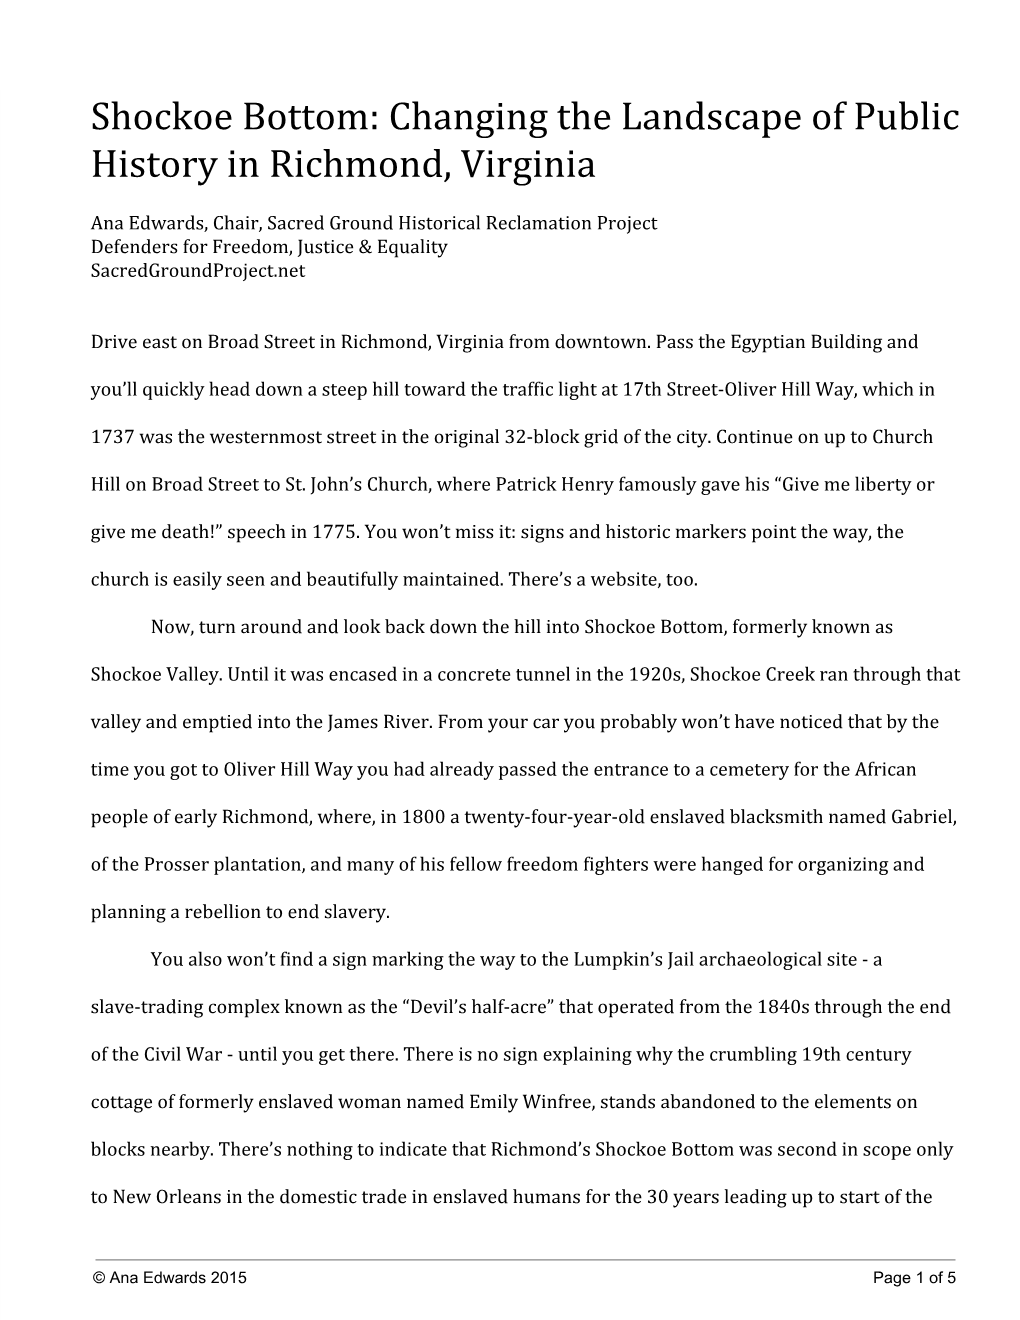 Shockoe Bottom: Changing the Landscape of Public History in Richmond, Virginia